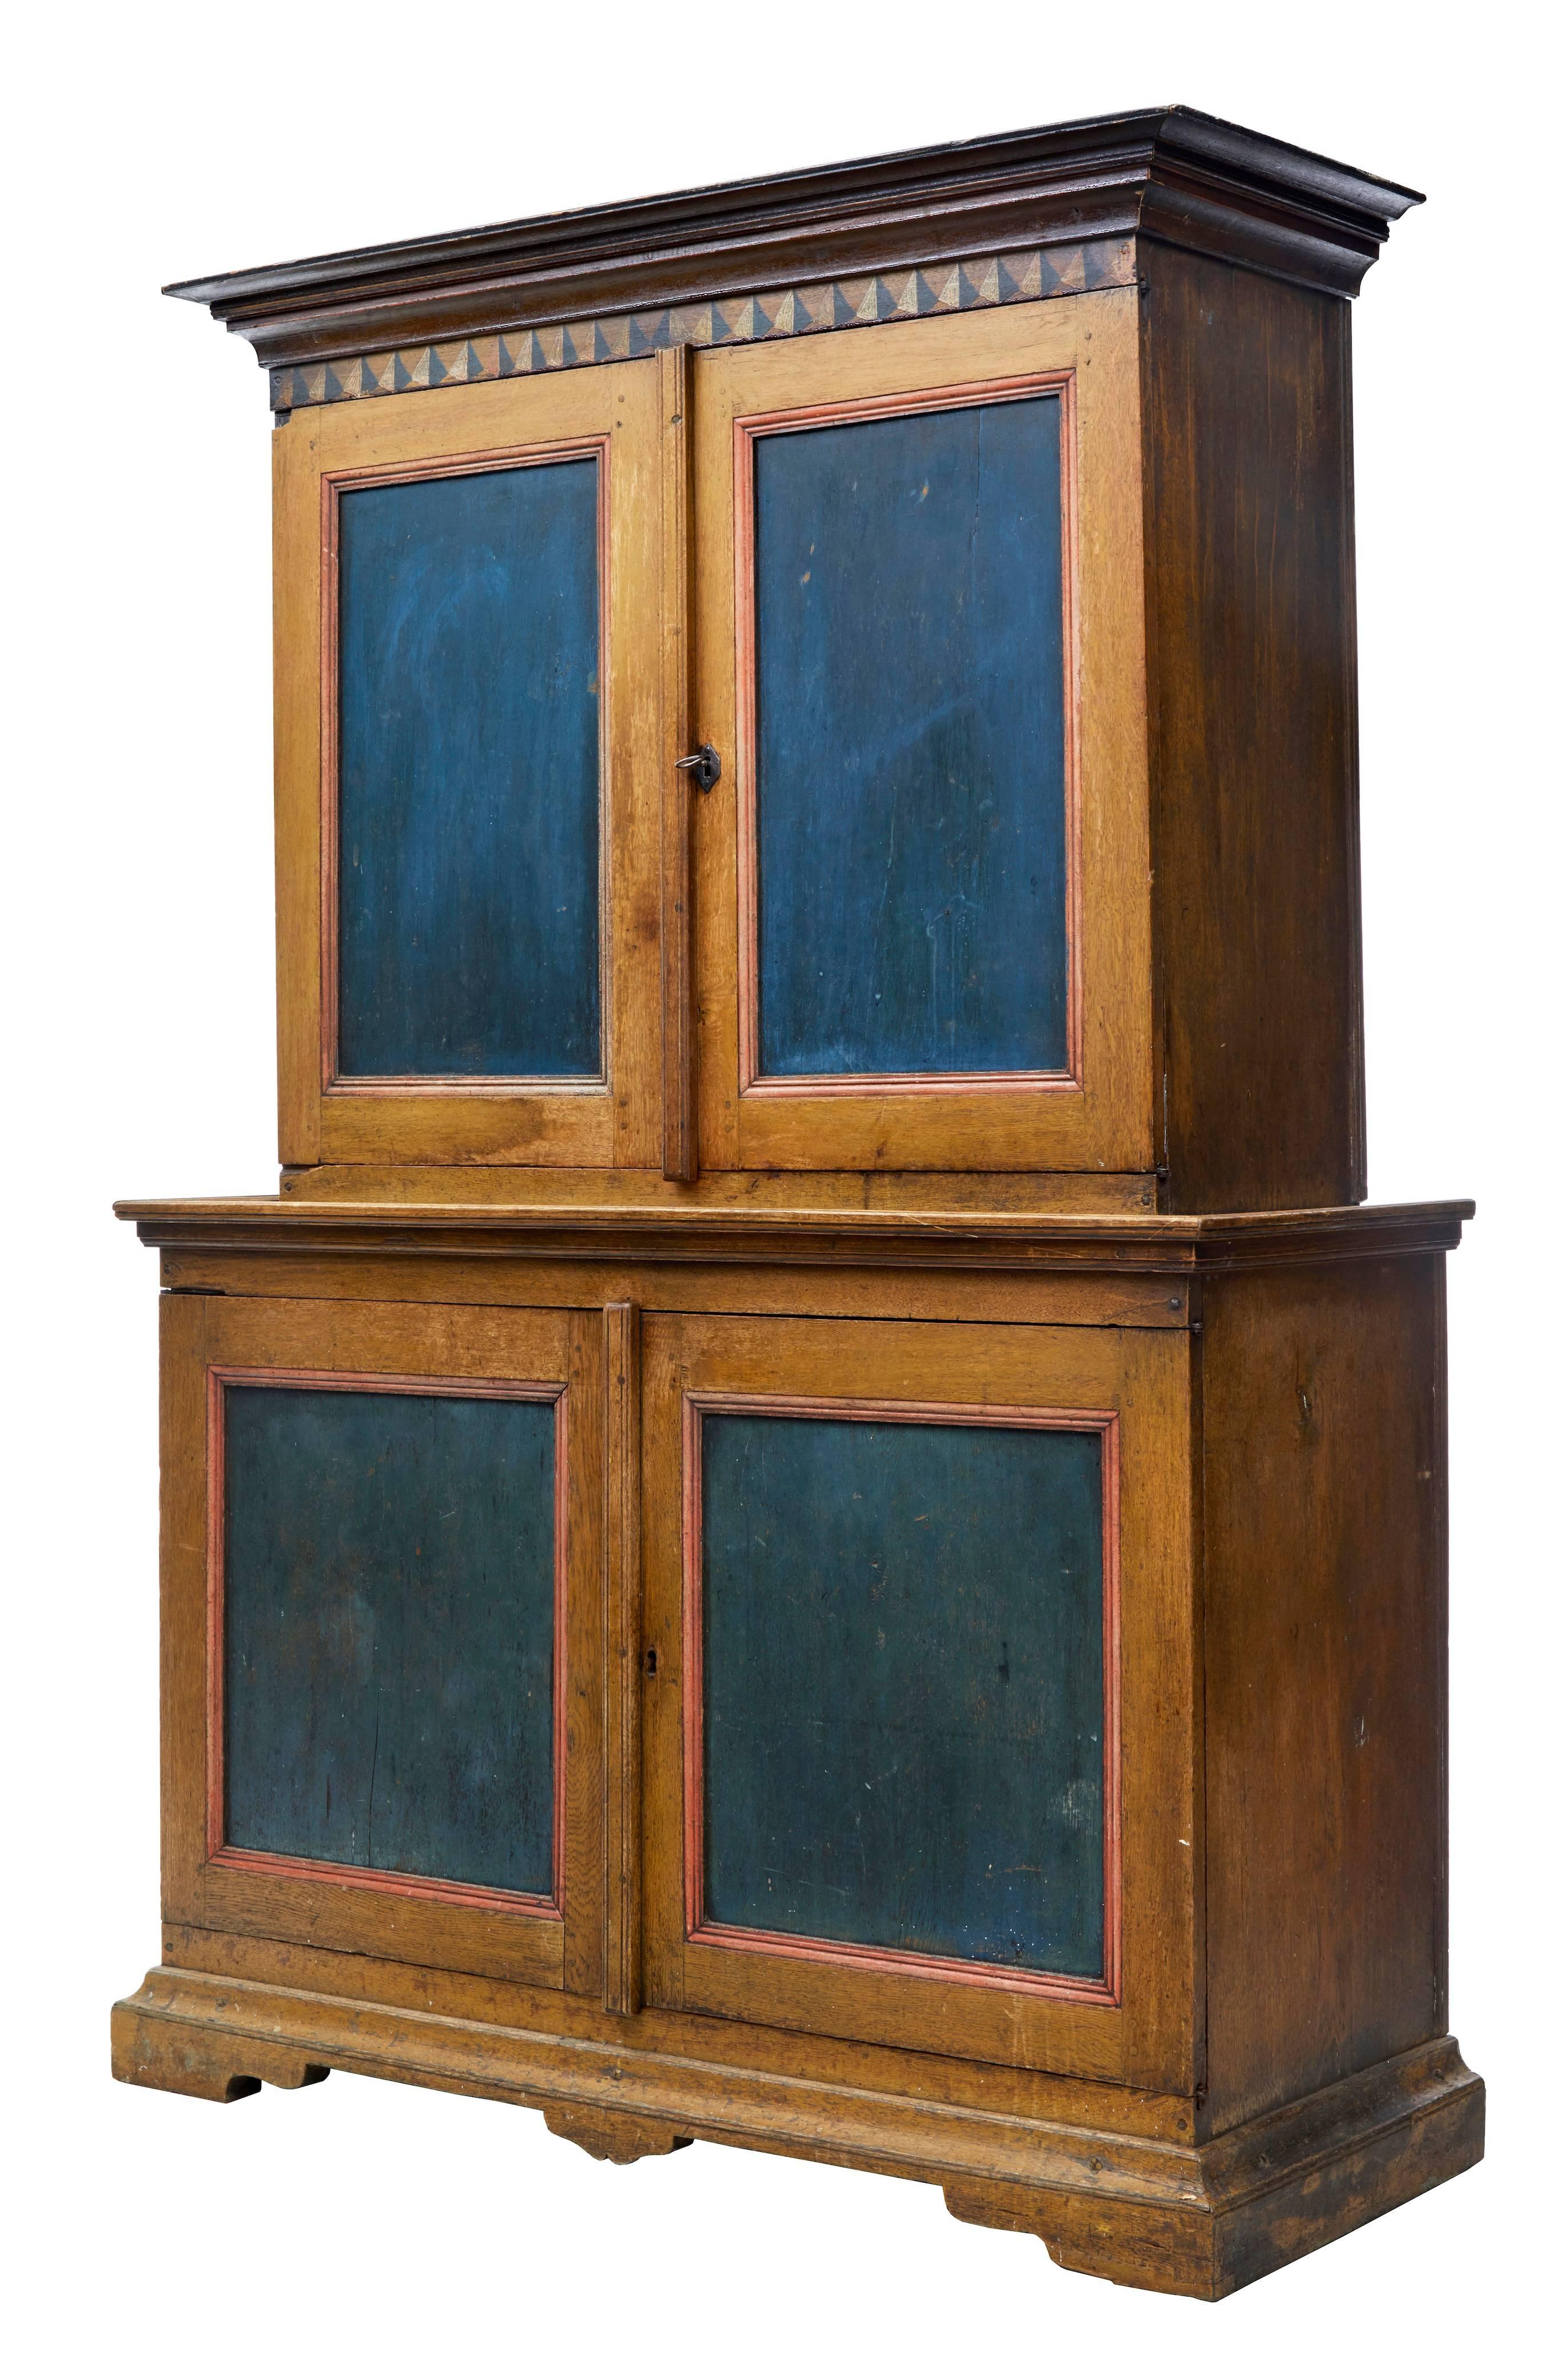 We are pleased to offer you this fine quality painted cabinet from Sweden, circa 1800.
We purchased this cabinet in the Dalsland region where it had been in place since it was made.
Original painted traditional Dalsland colors and even more rare